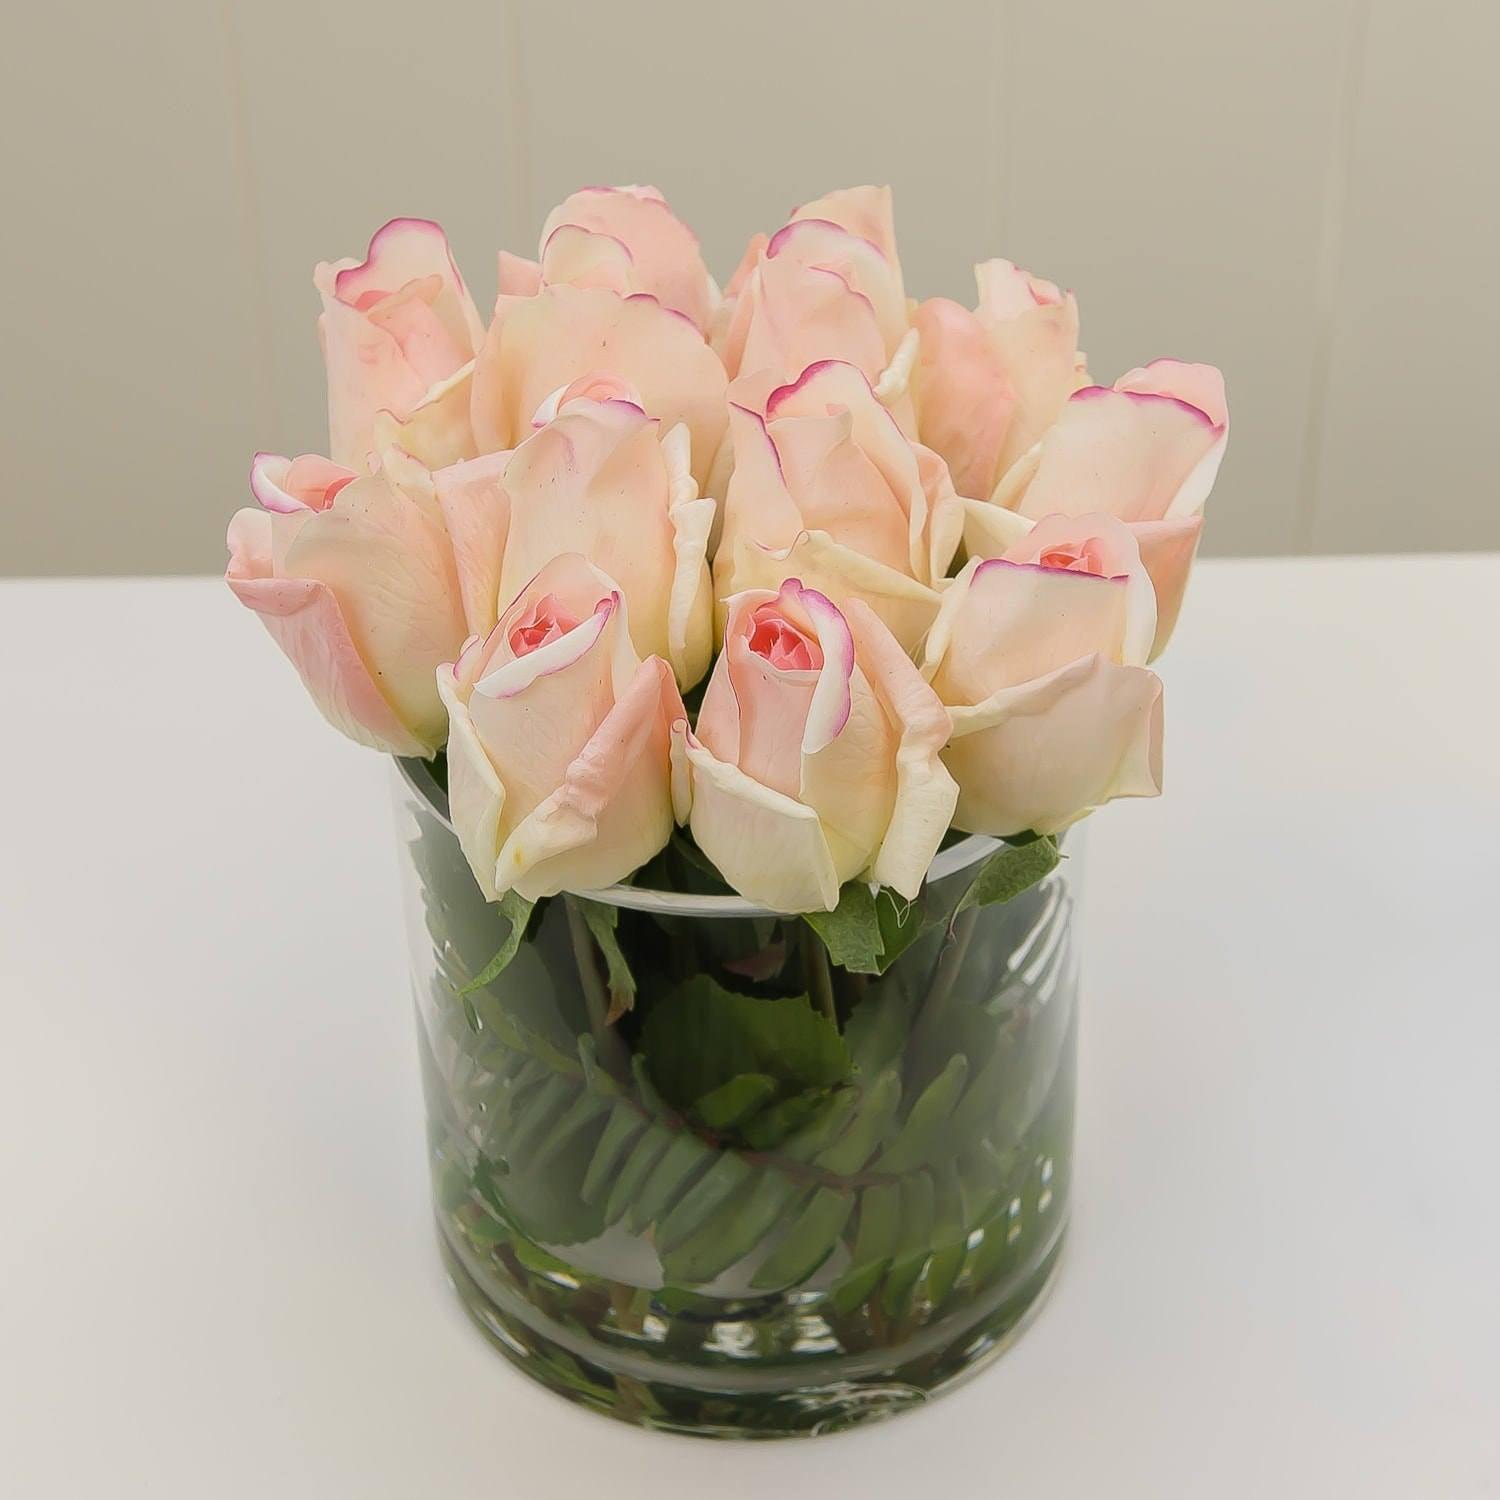 Real Touch Cream Tipped Pink Bud Rose Arrangement - Flovery